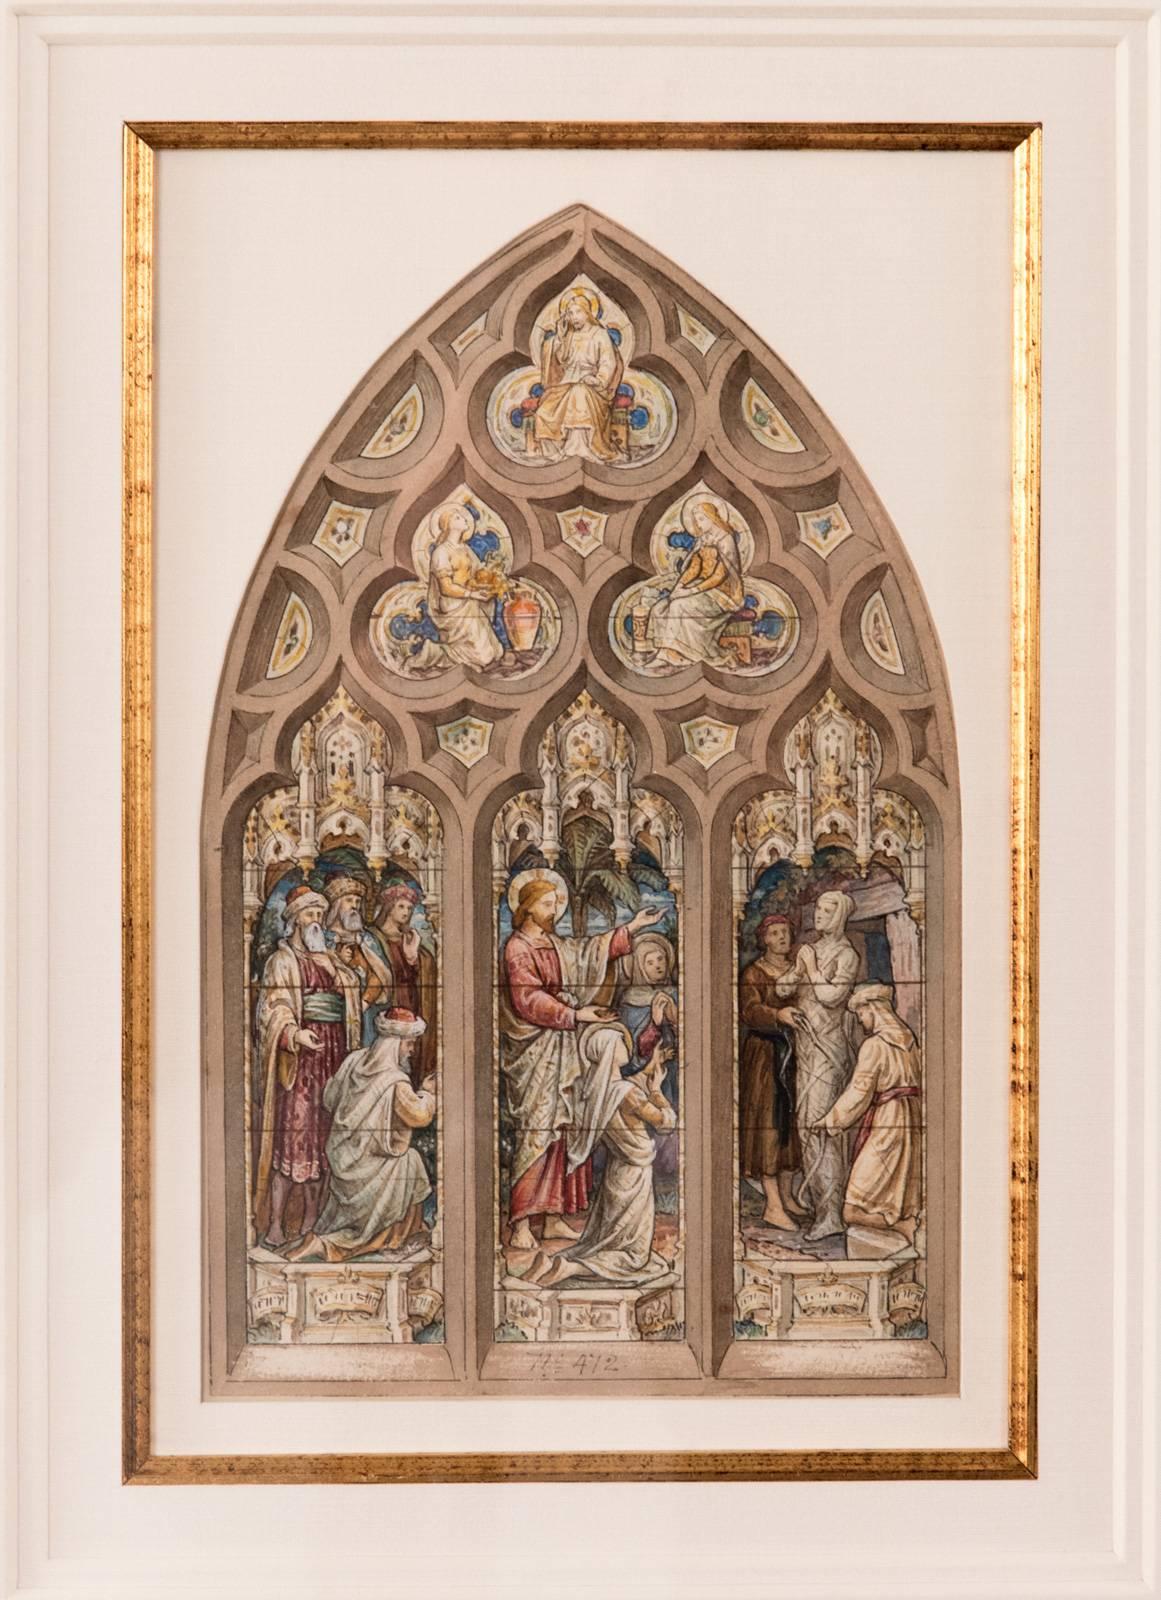 An original watercolor created by the artists Thomas William Camm (British, 1839-1912) for a Church commission. Camm is considered one of Great Britain's most talented designers of stained glass. Before production on a monumental work of stained